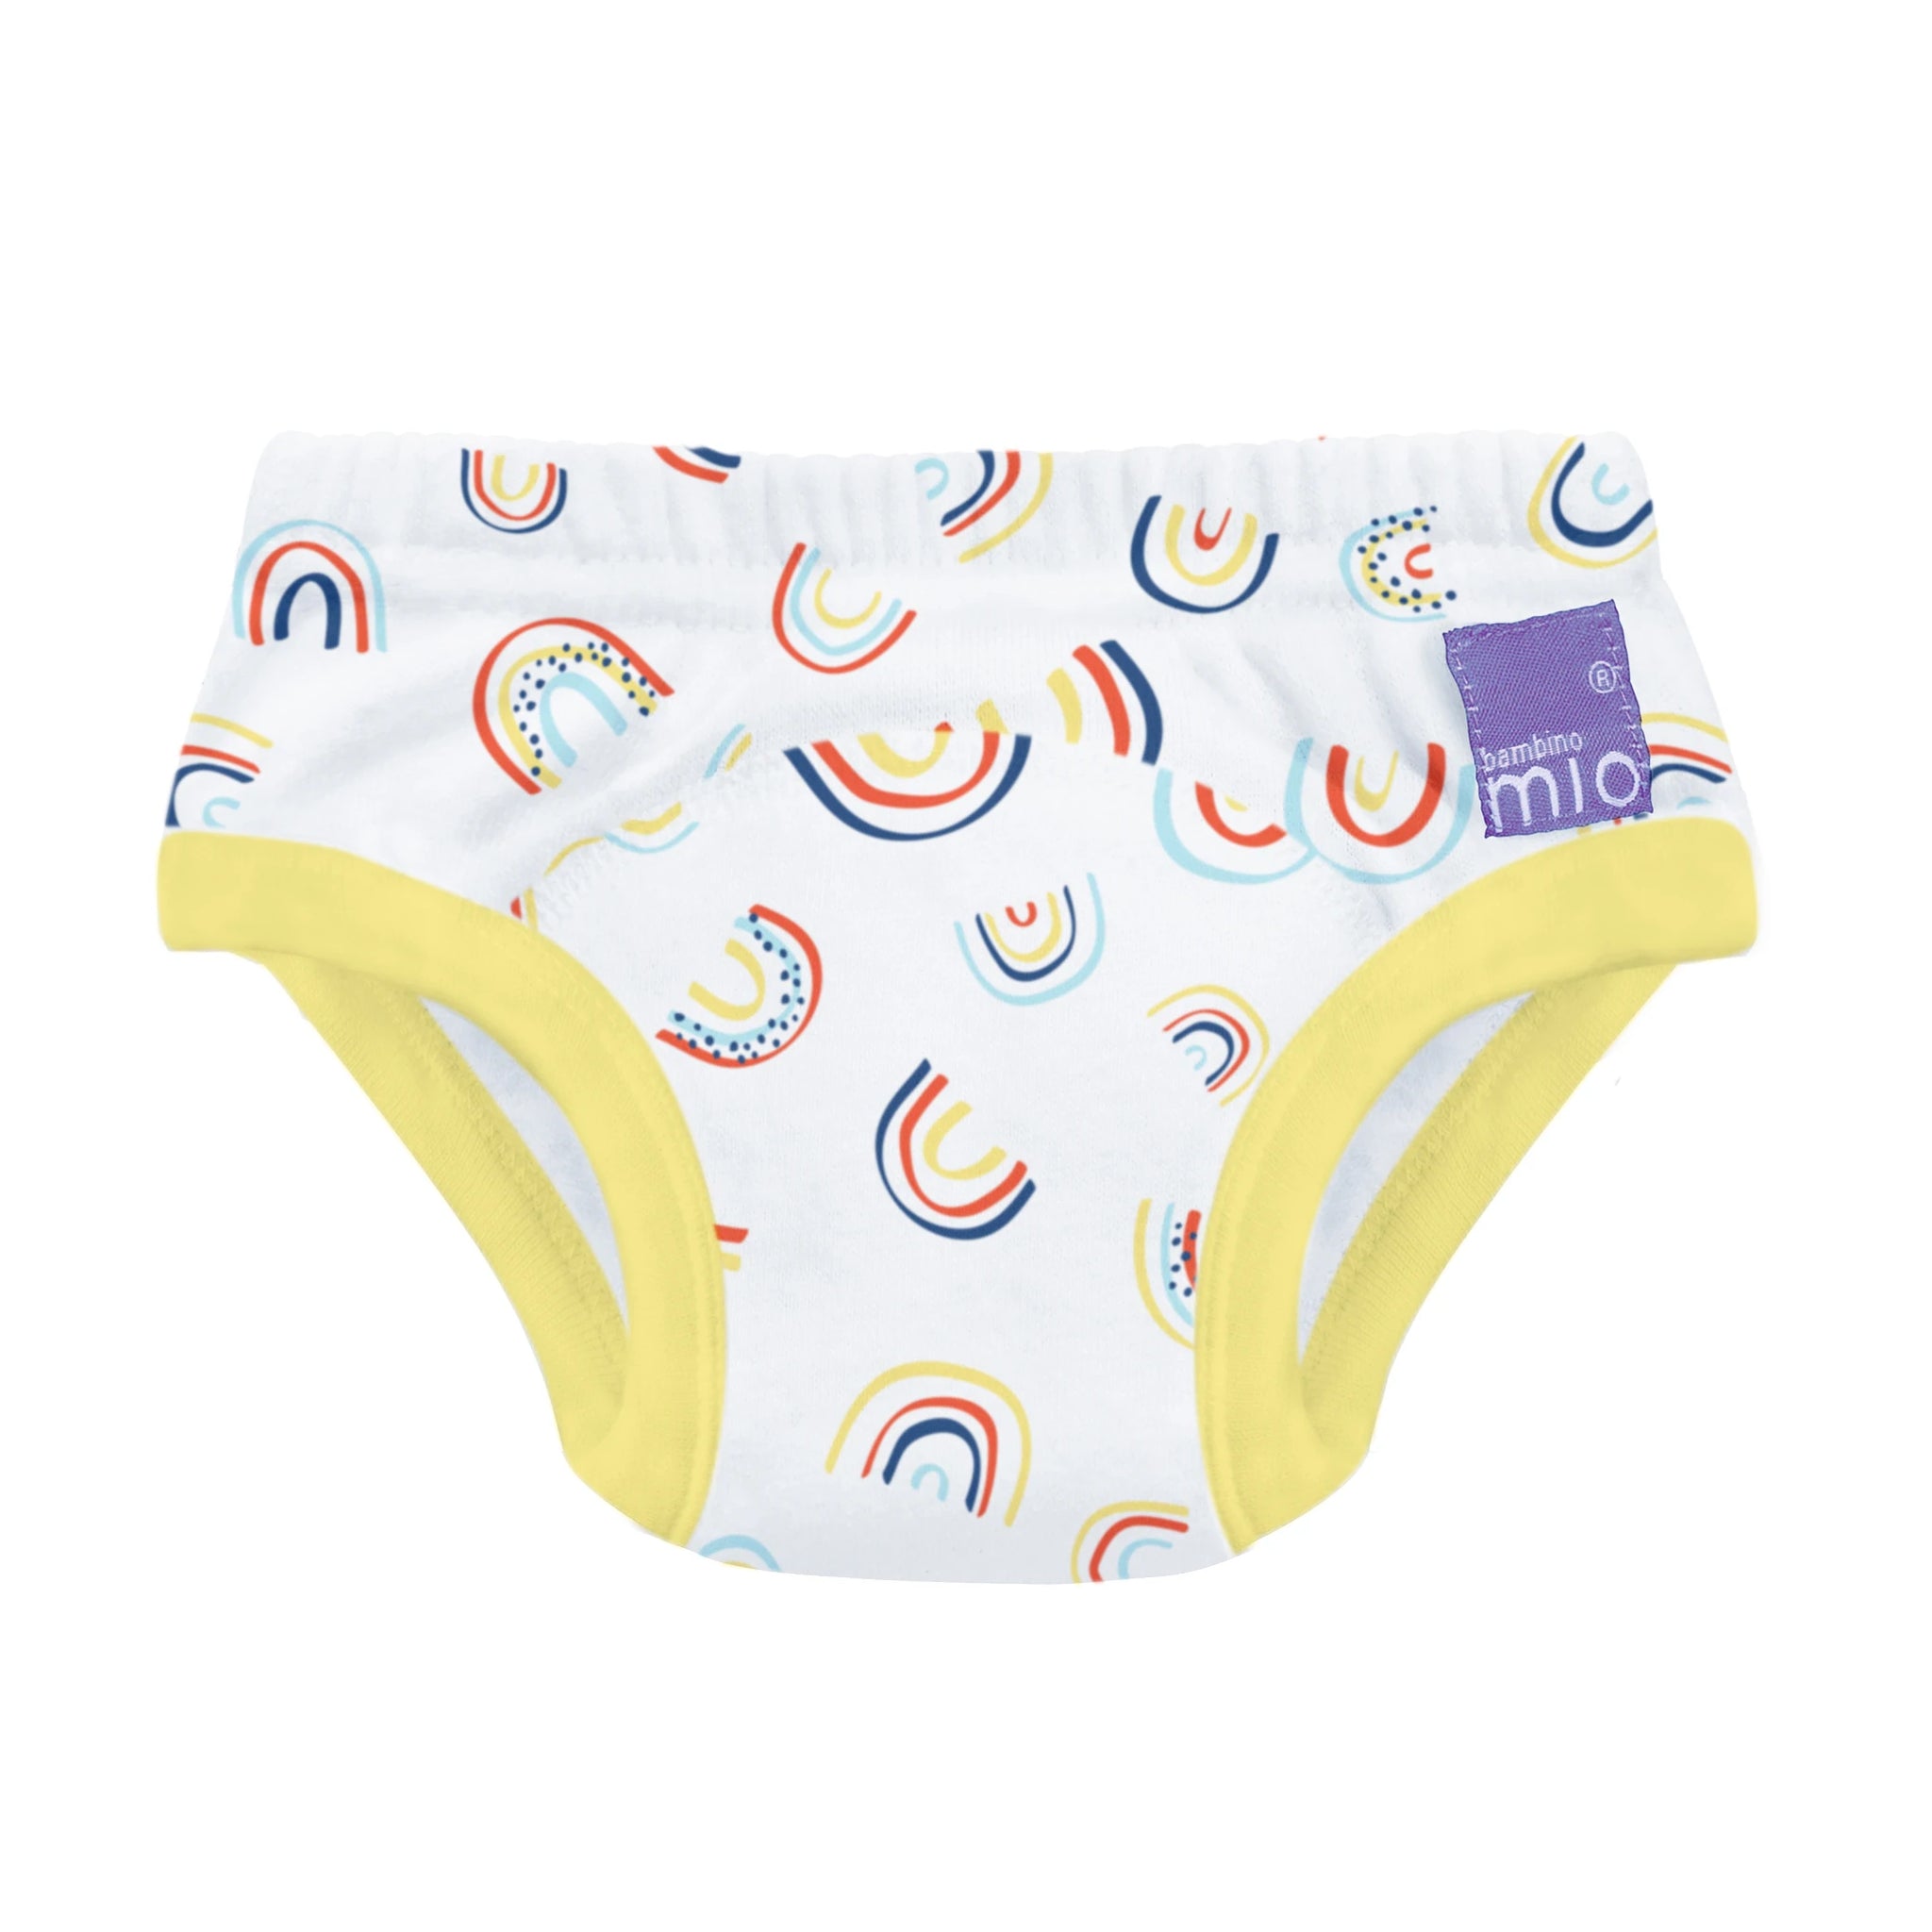 The Best Potty Training Pants in 2023 - Top Reviews by Kansas City Star